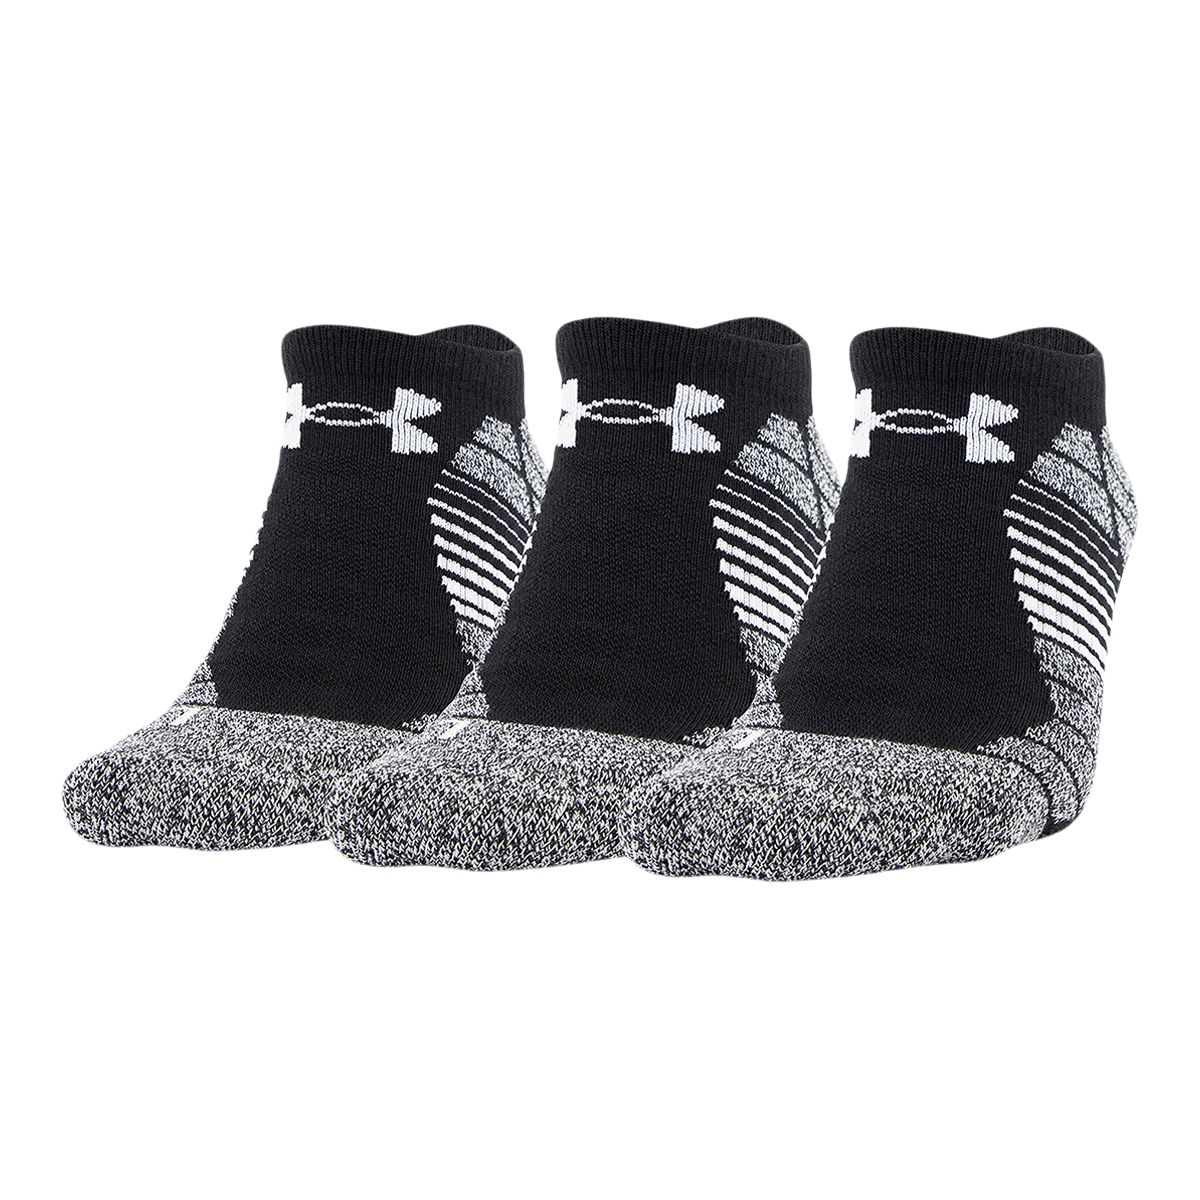 UNDER ARMOUR PERFORMANCE TECH NO SHOW SOCKS – 3 PACK – WHITE